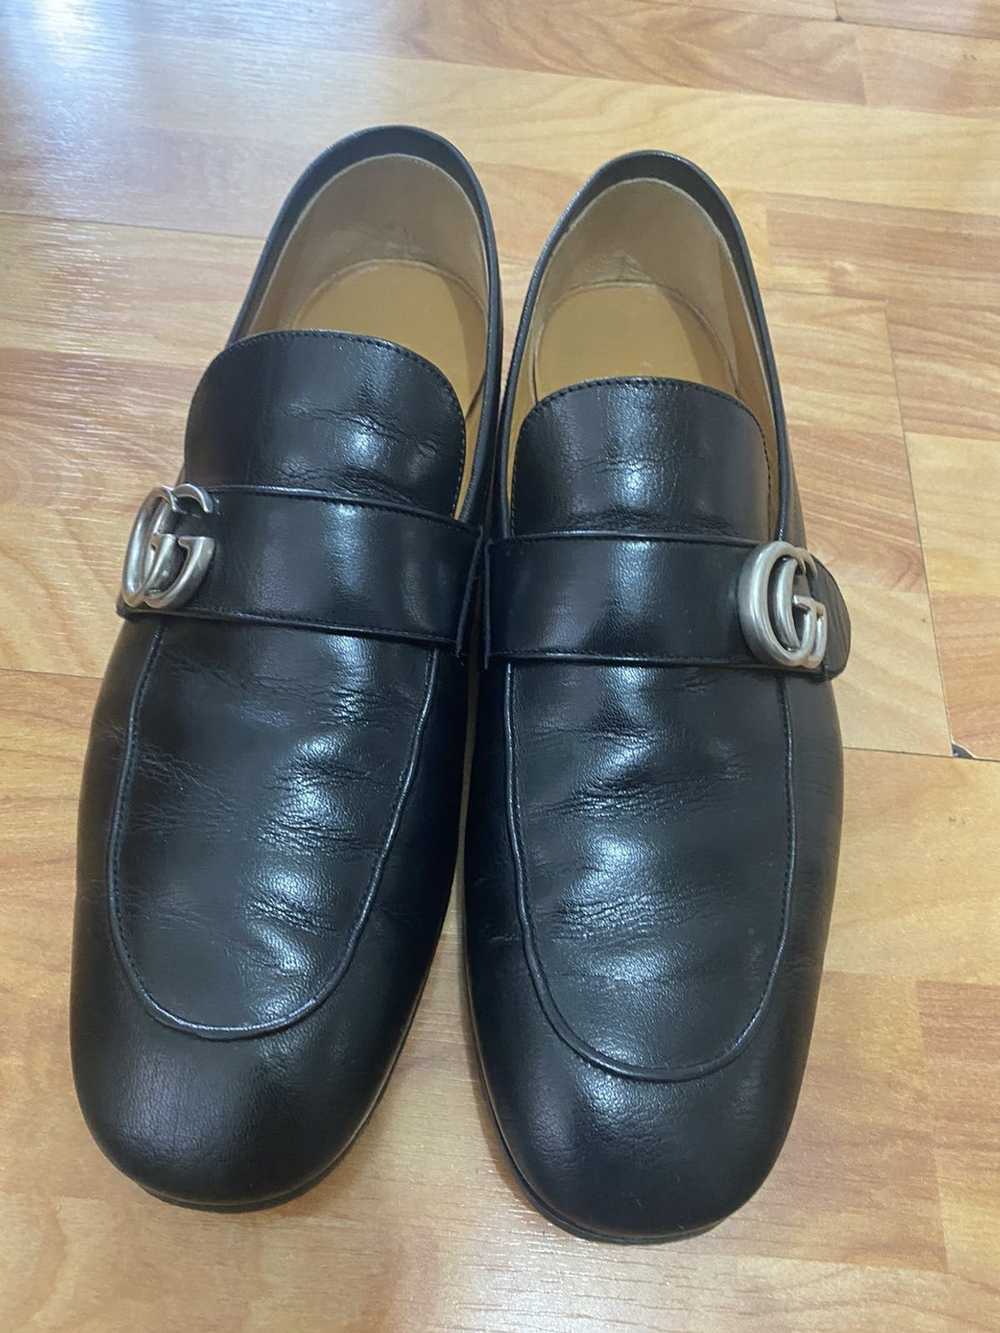 Gucci Donnie Web Stripe Double GG Black Leather Loafers Men's 7.5 8 US UK 7  $799